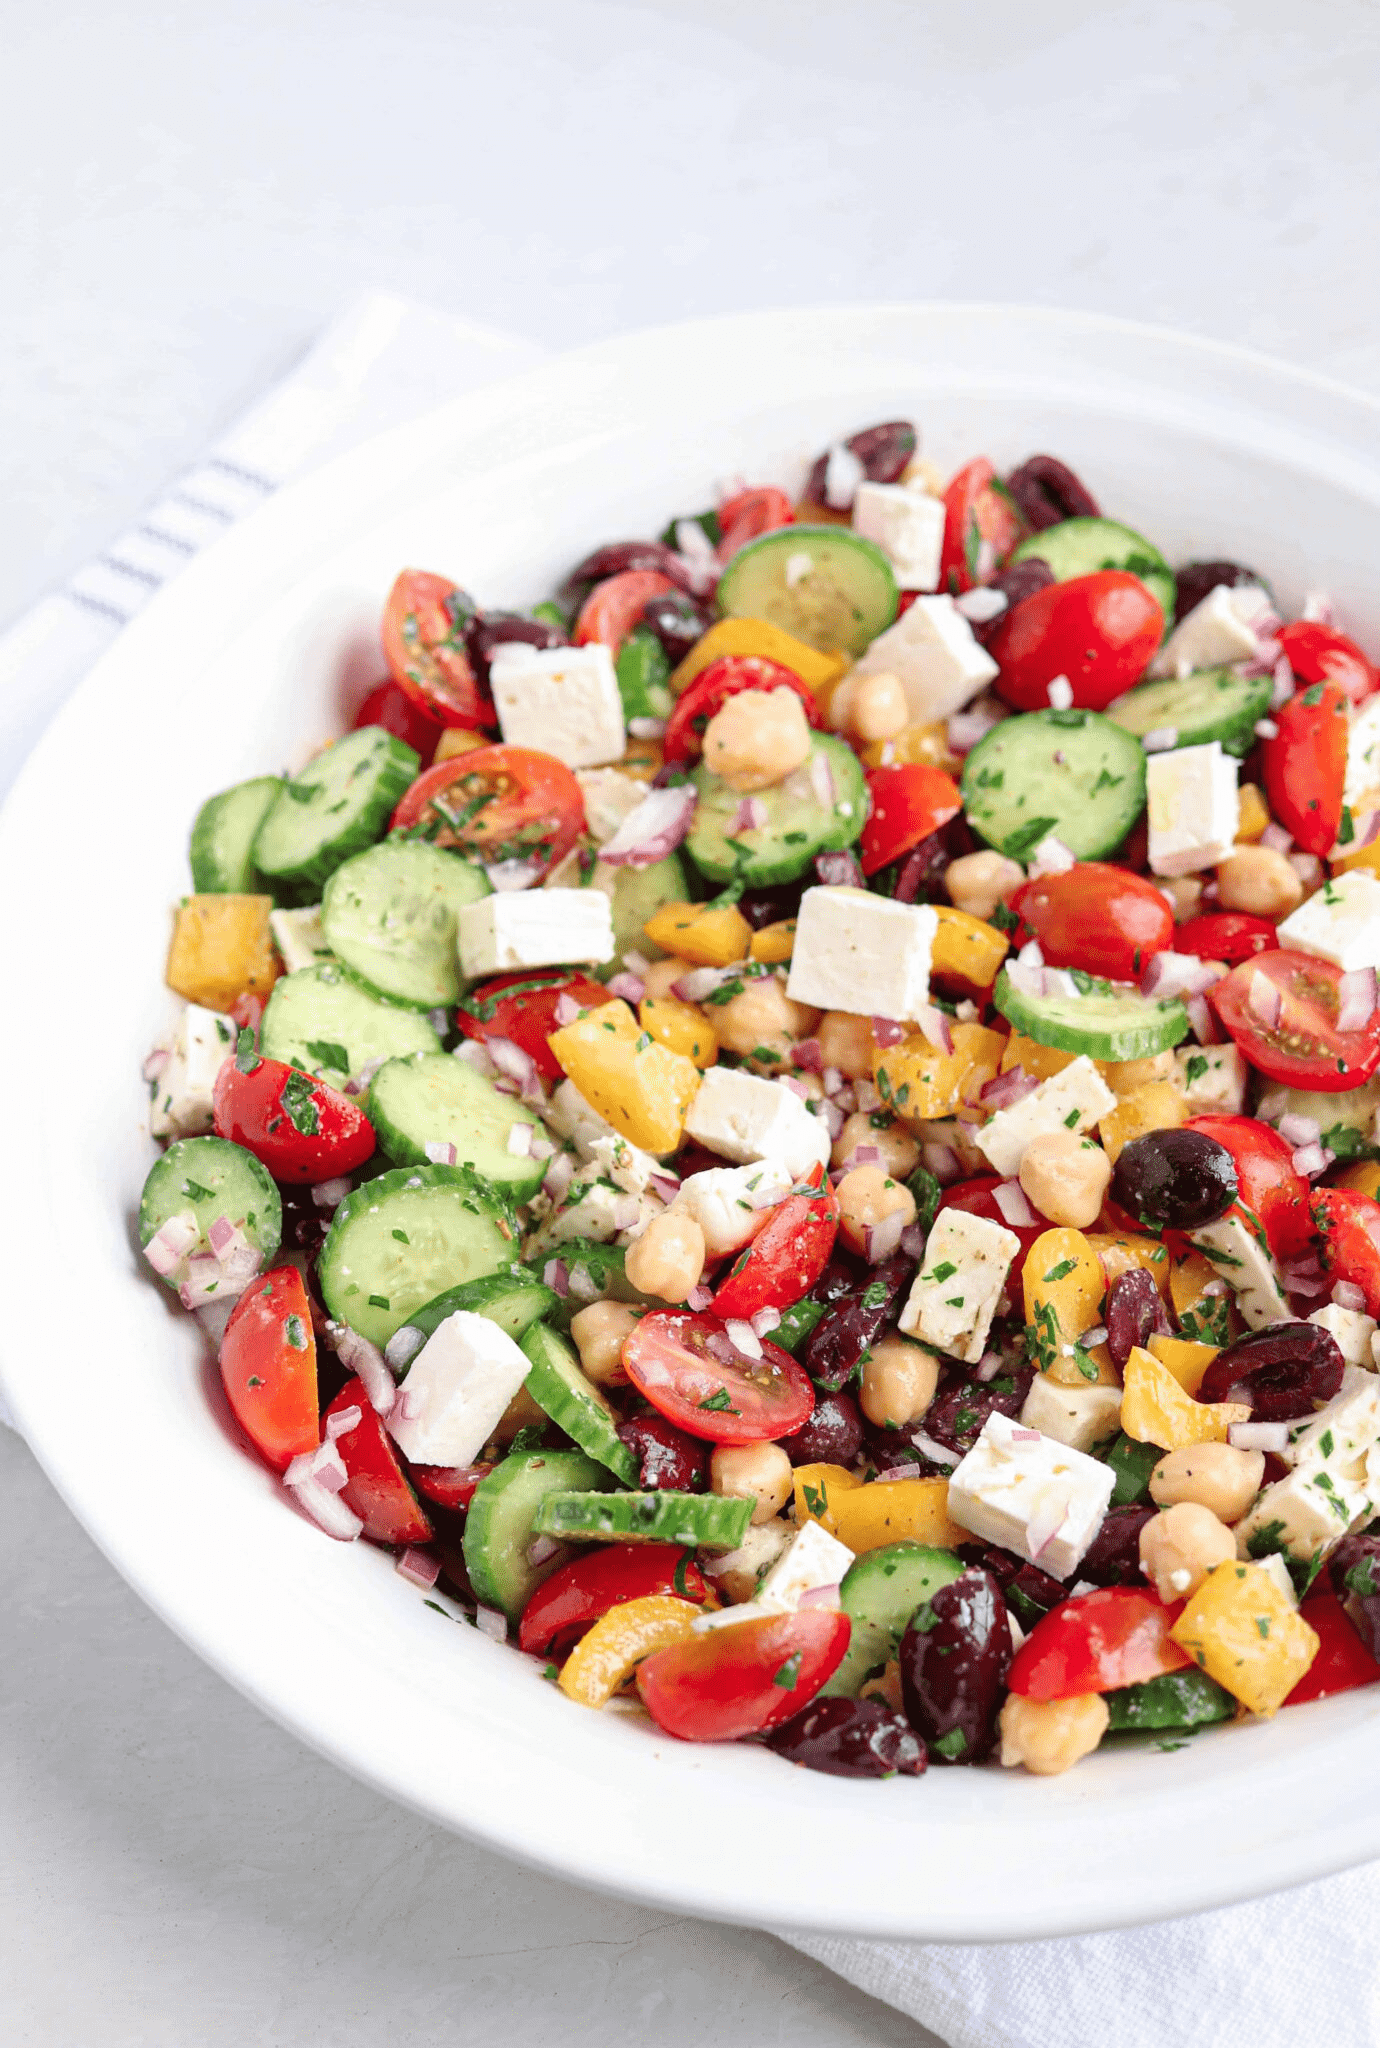 Greek chickpea salad with feta cheese, tomatoes, cucumbers and chickpeas in a large white bowl.